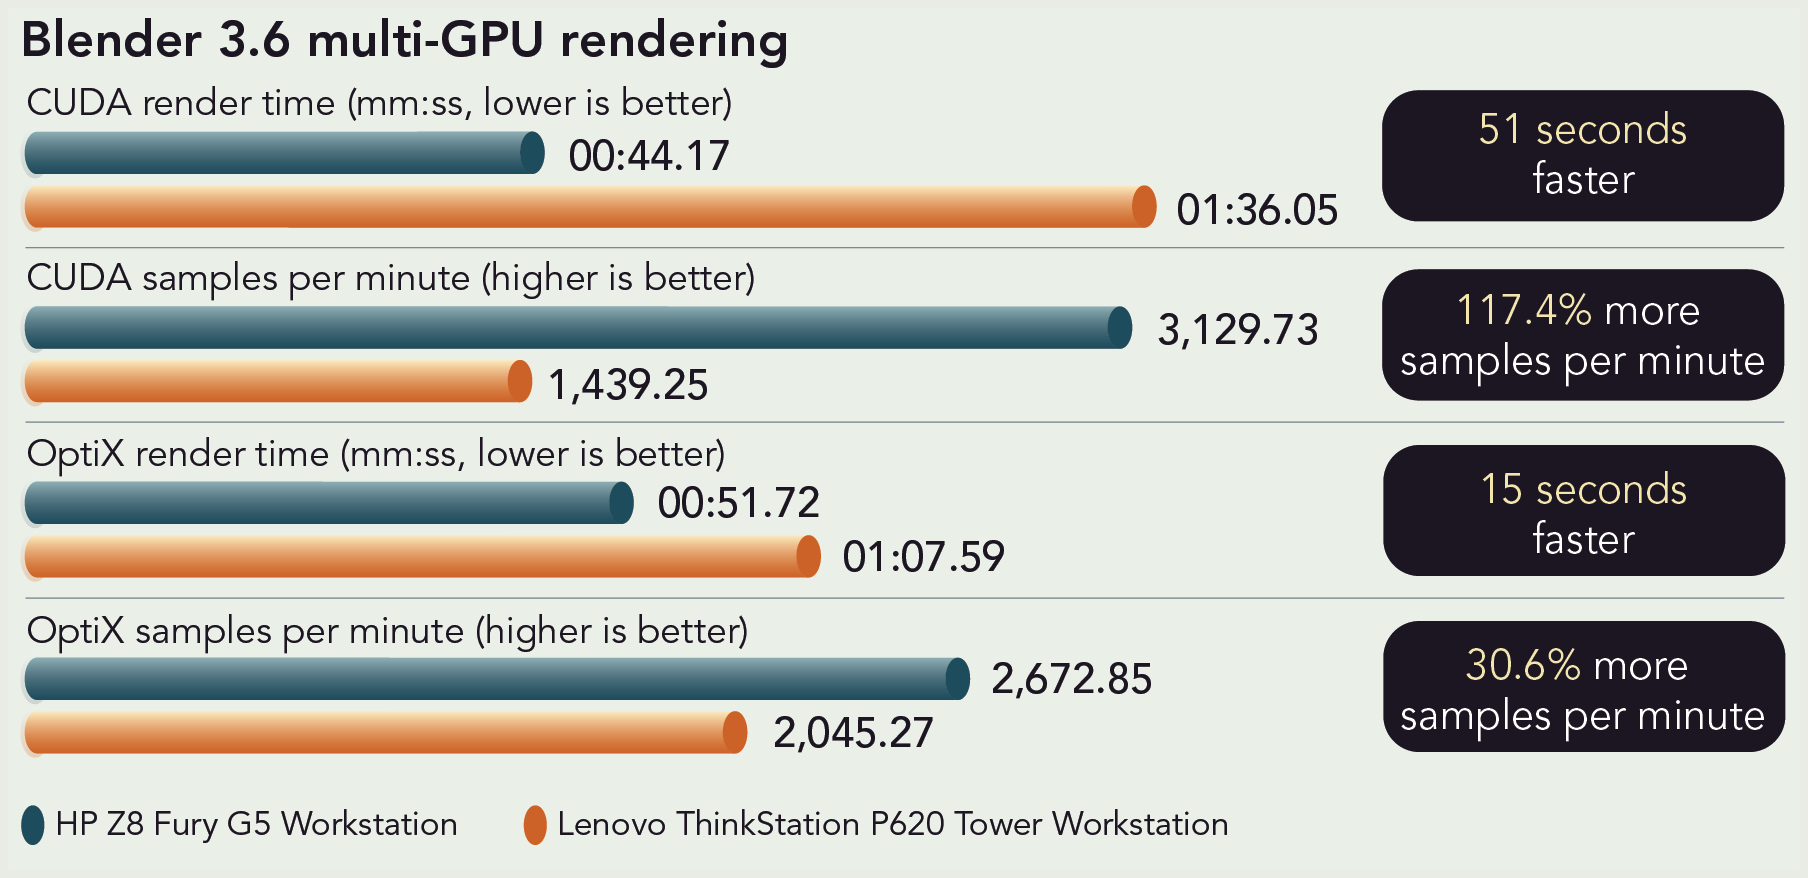 Chart of Blender 3.6 multi-GPU rendering results. For CUDA render time (lower is better): HP Z8 Fury G5 Workstation render time is 44.17 seconds and Lenovo ThinkStation P620 Tower Workstation render time is 1 minute and 36.05 seconds. 51 seconds faster. For CUDA samples per minute (higher is better): HP Z8 Fury G5 Workstation is 3,129.73 samples per minute and Lenovo ThinkStation P620 Tower Workstation is 1,439.25 samples per minute. 117.4 percent more samples per minute. For OptiX render time (lower is better): HP Z8 Fury G5 Workstation render time is 51.72 seconds and Lenovo ThinkStation P620 Tower Workstation render time is 1 minute and 7.59 seconds. 15 seconds faster. For OptiX samples per minute (higher is better): HP Z8 Fury G5 Workstation is 2,672.85 samples per minute and Lenovo ThinkStation P620 Tower Workstation is 2,045.27 samples per minute. 30.6 percent more samples per minute.